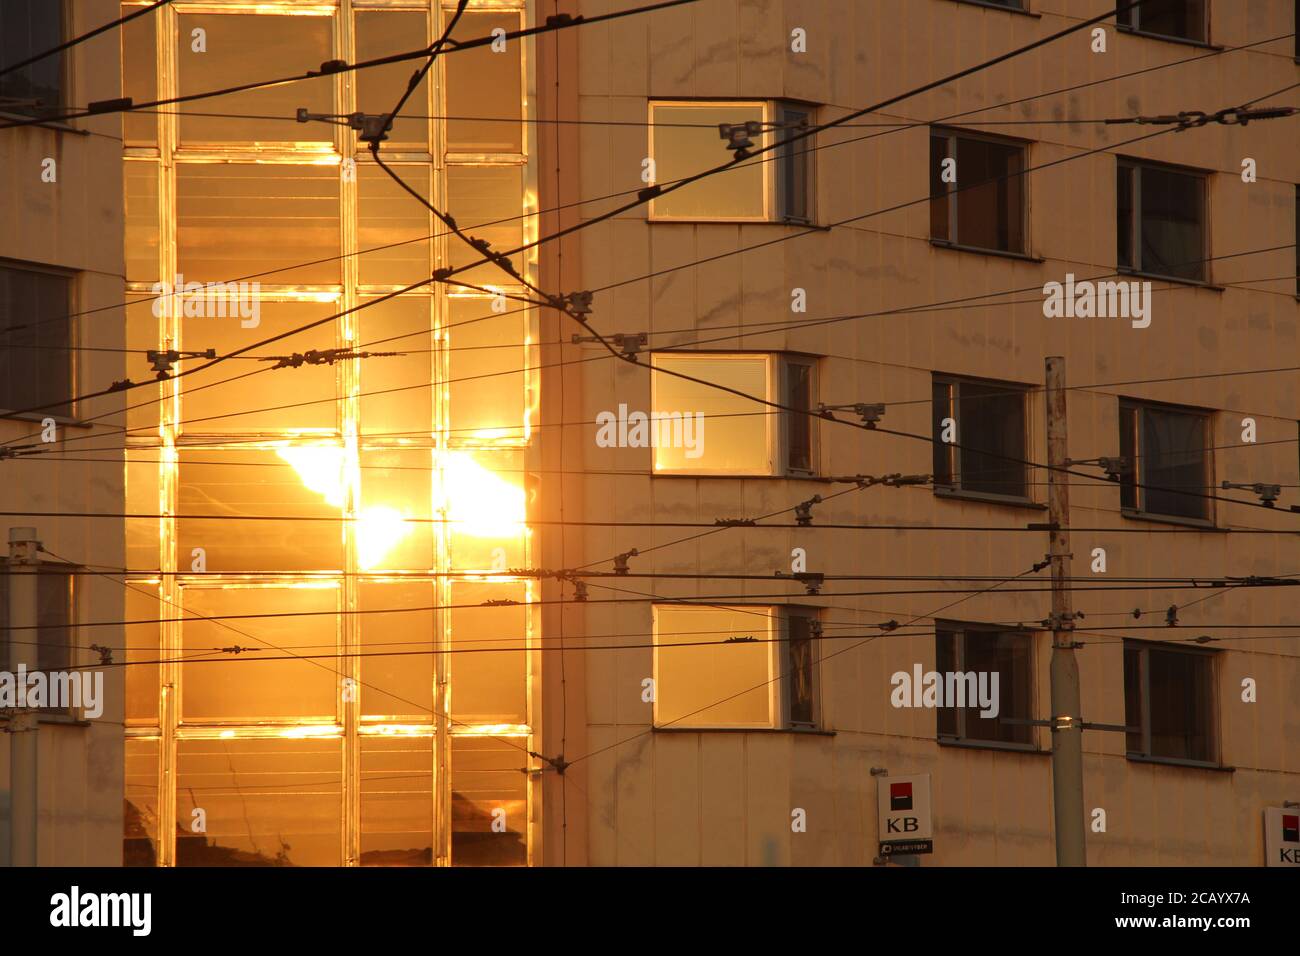 In Palmovka, Prague, Czech Republic, you can see the setting sun's light of yellow/ orange colours being reflected on the building for that bank, KB. Stock Photo